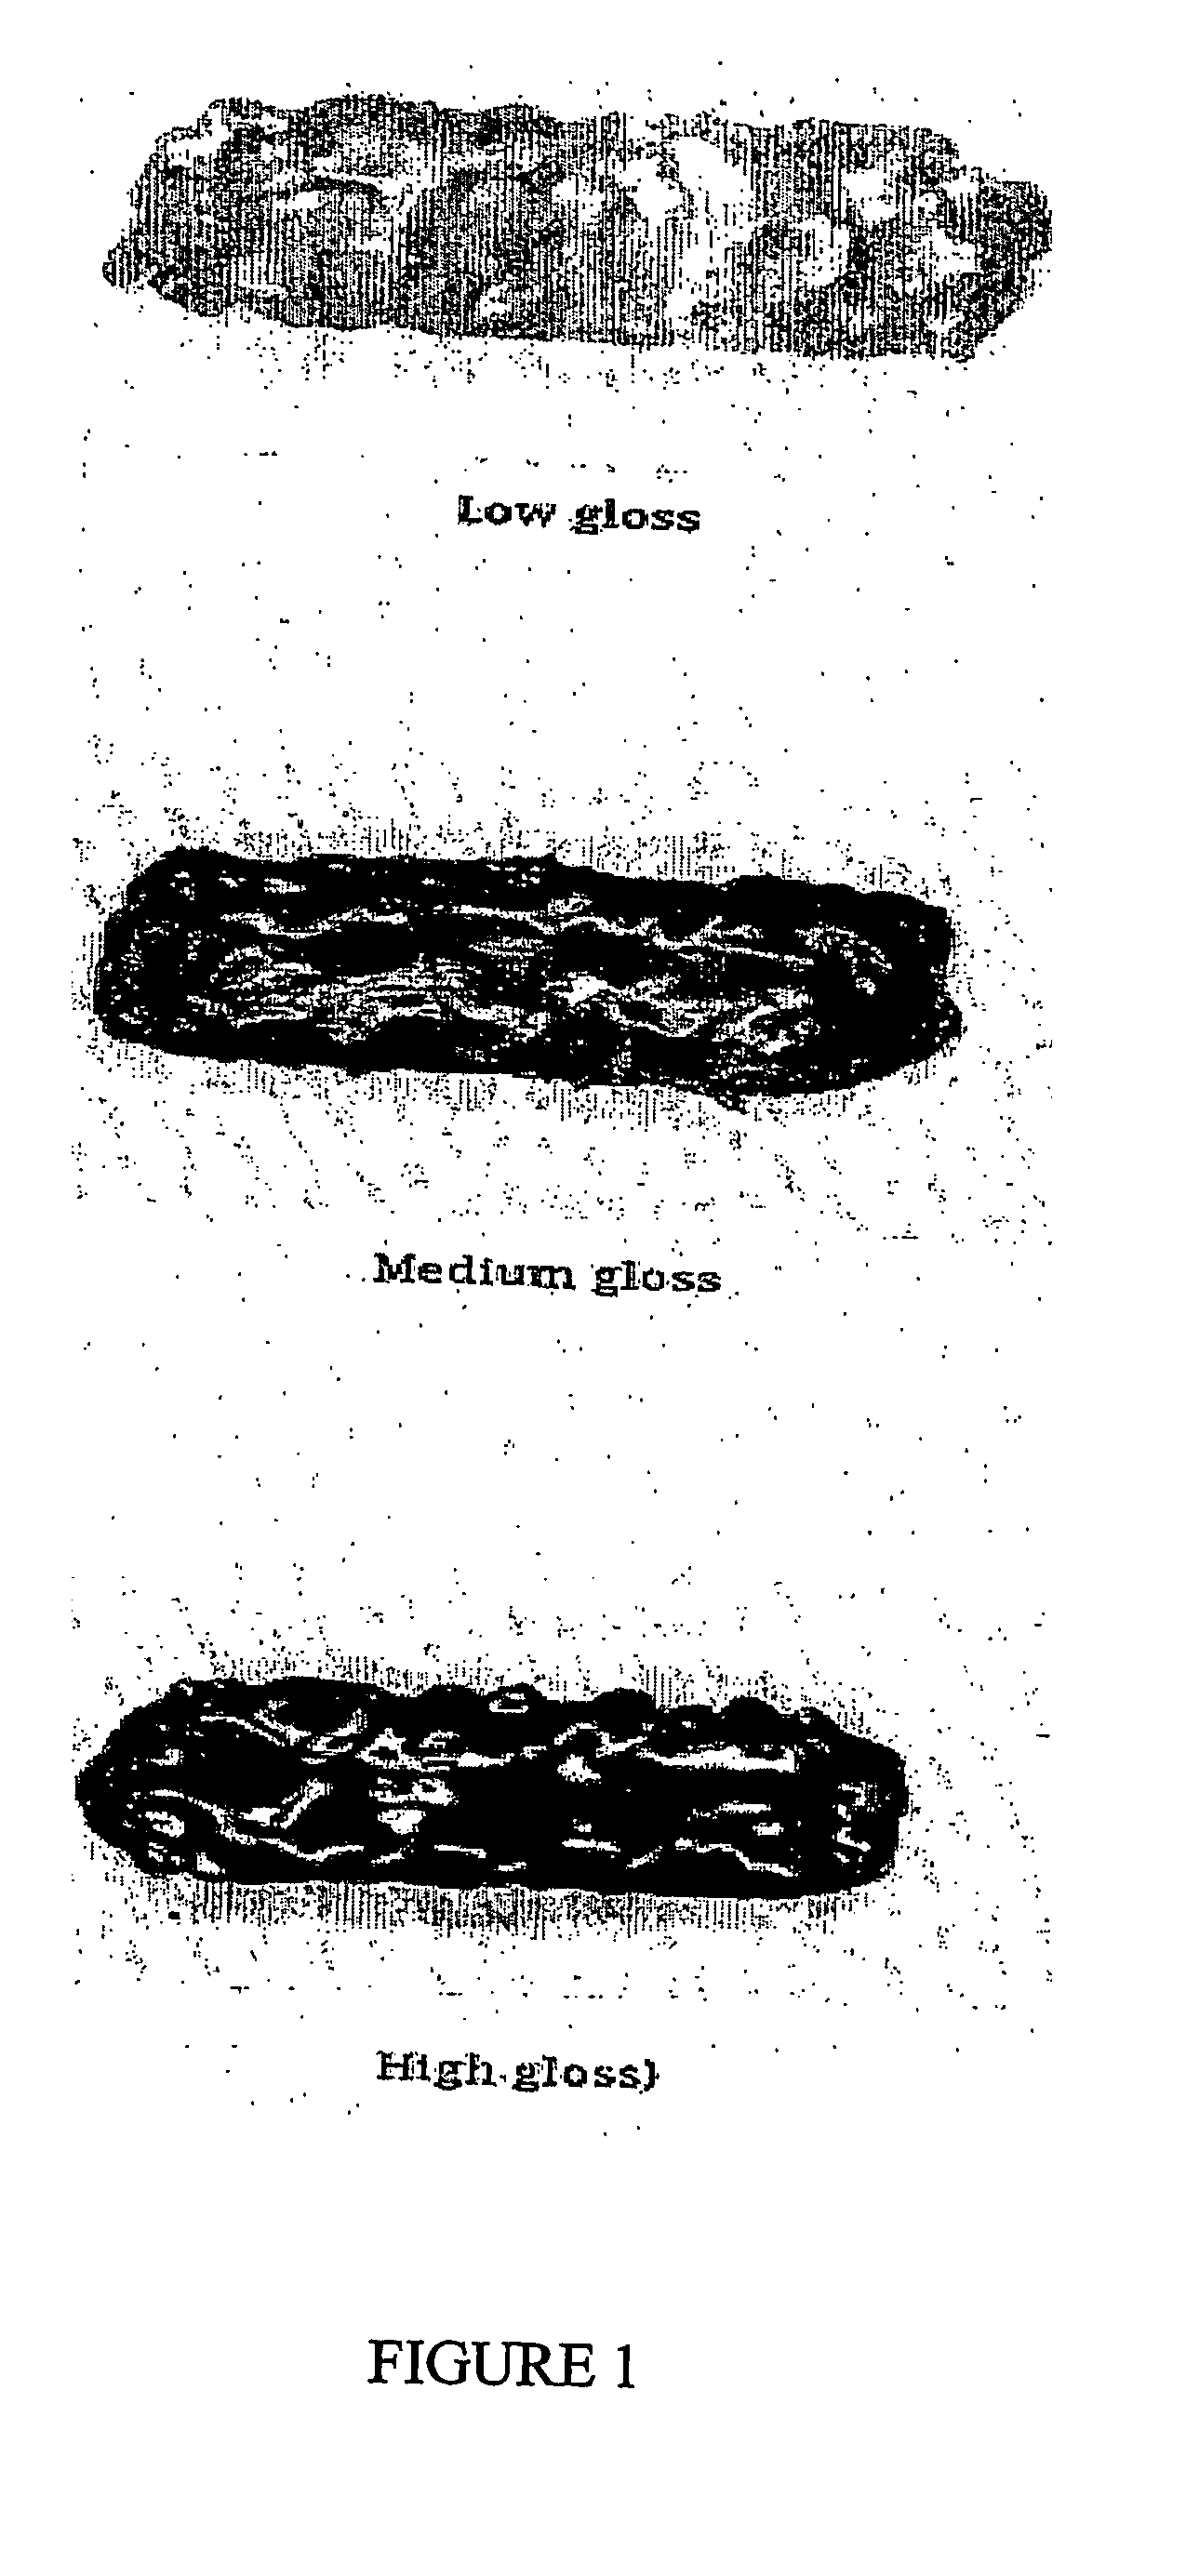 Reduced-fat flavored coating and methods of using same